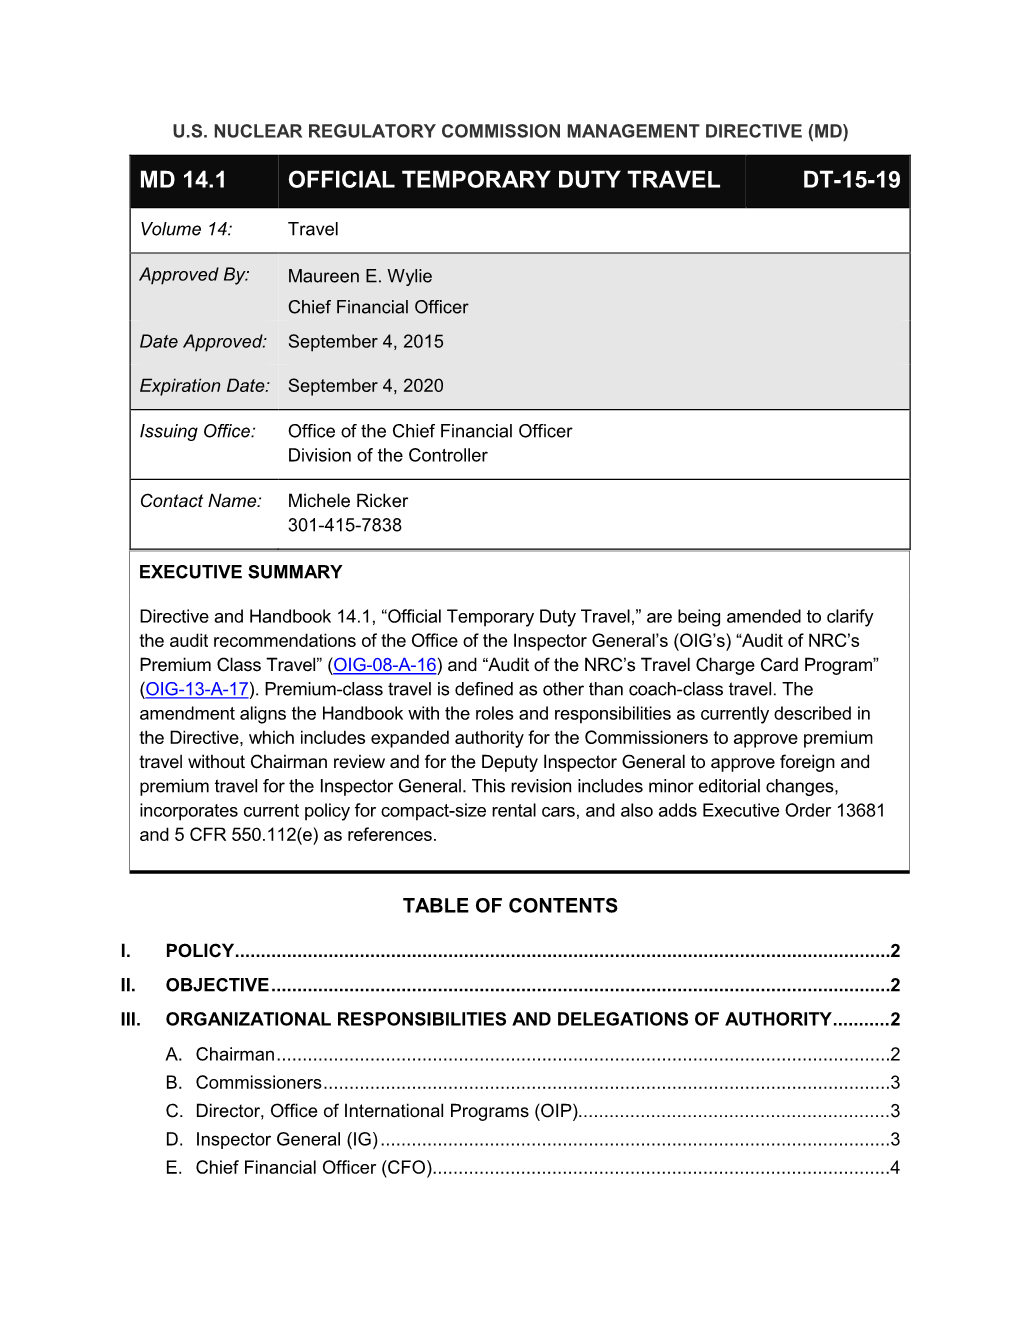 Official Temporary Duty Travel